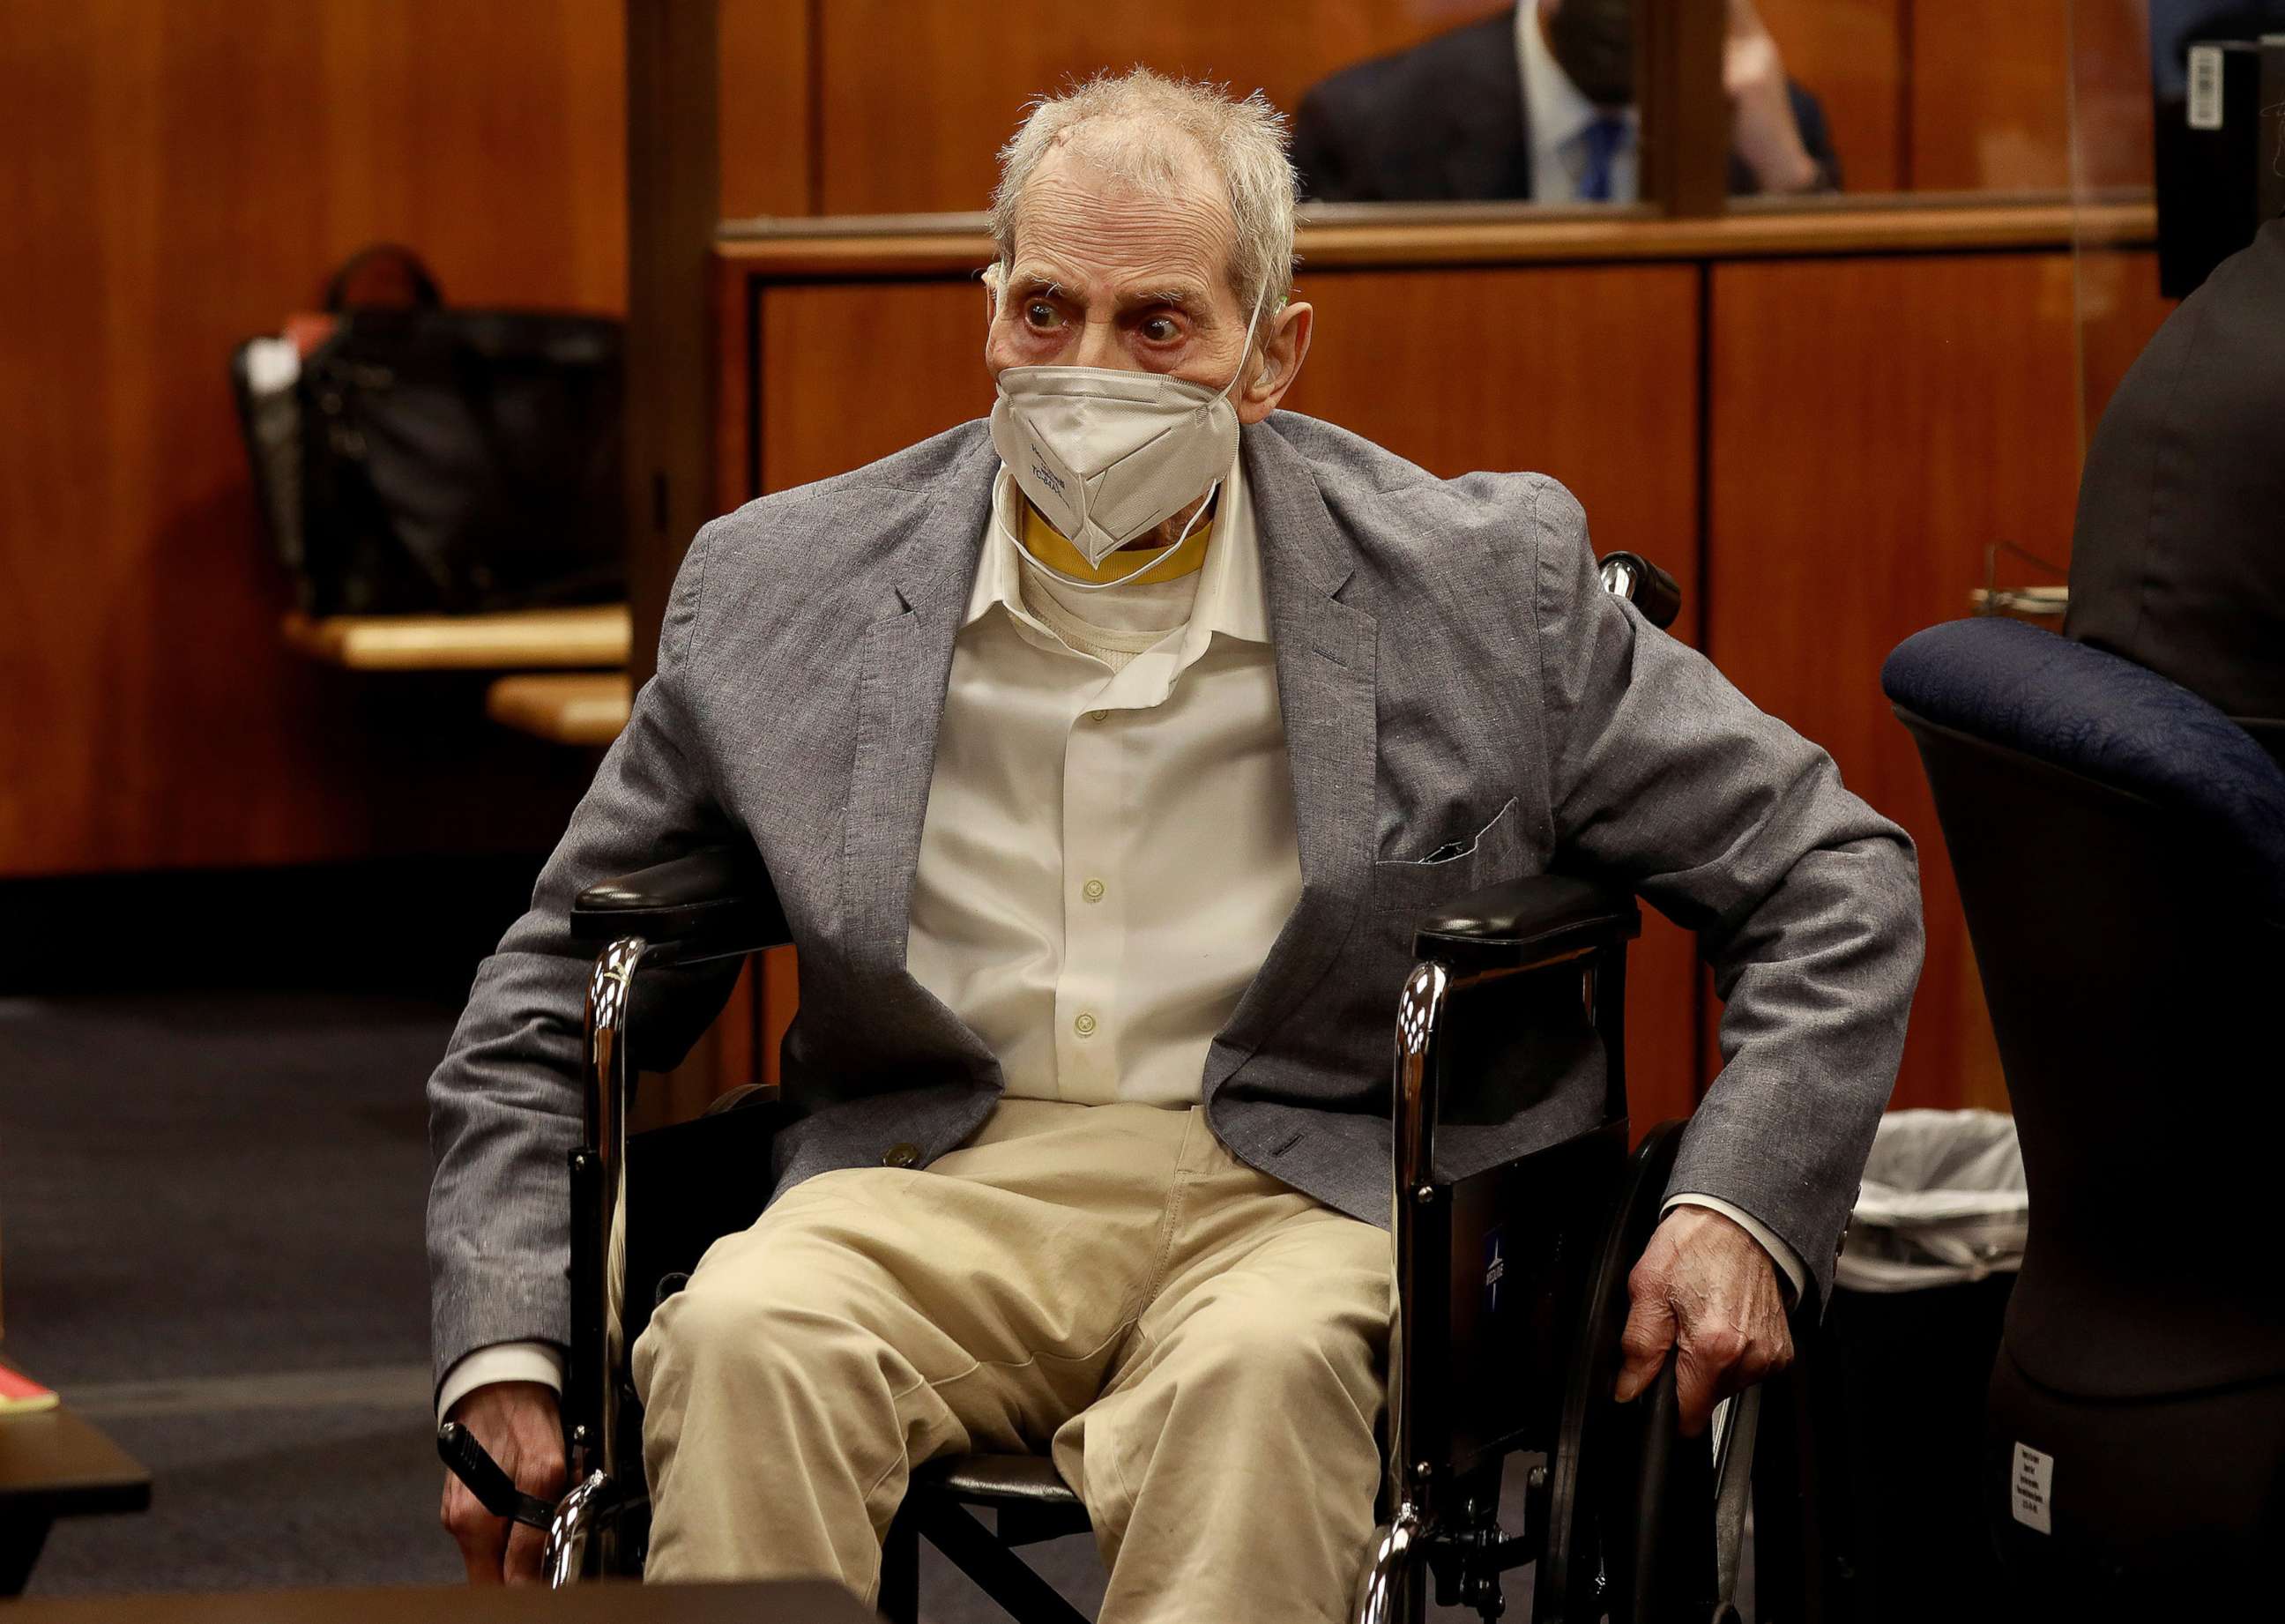 PHOTO: Robert Durst in an Inglewood courtroom for closing arguments in his murder trial at the Inglewood Courthouse in Calif., Sept. 8, 2021.